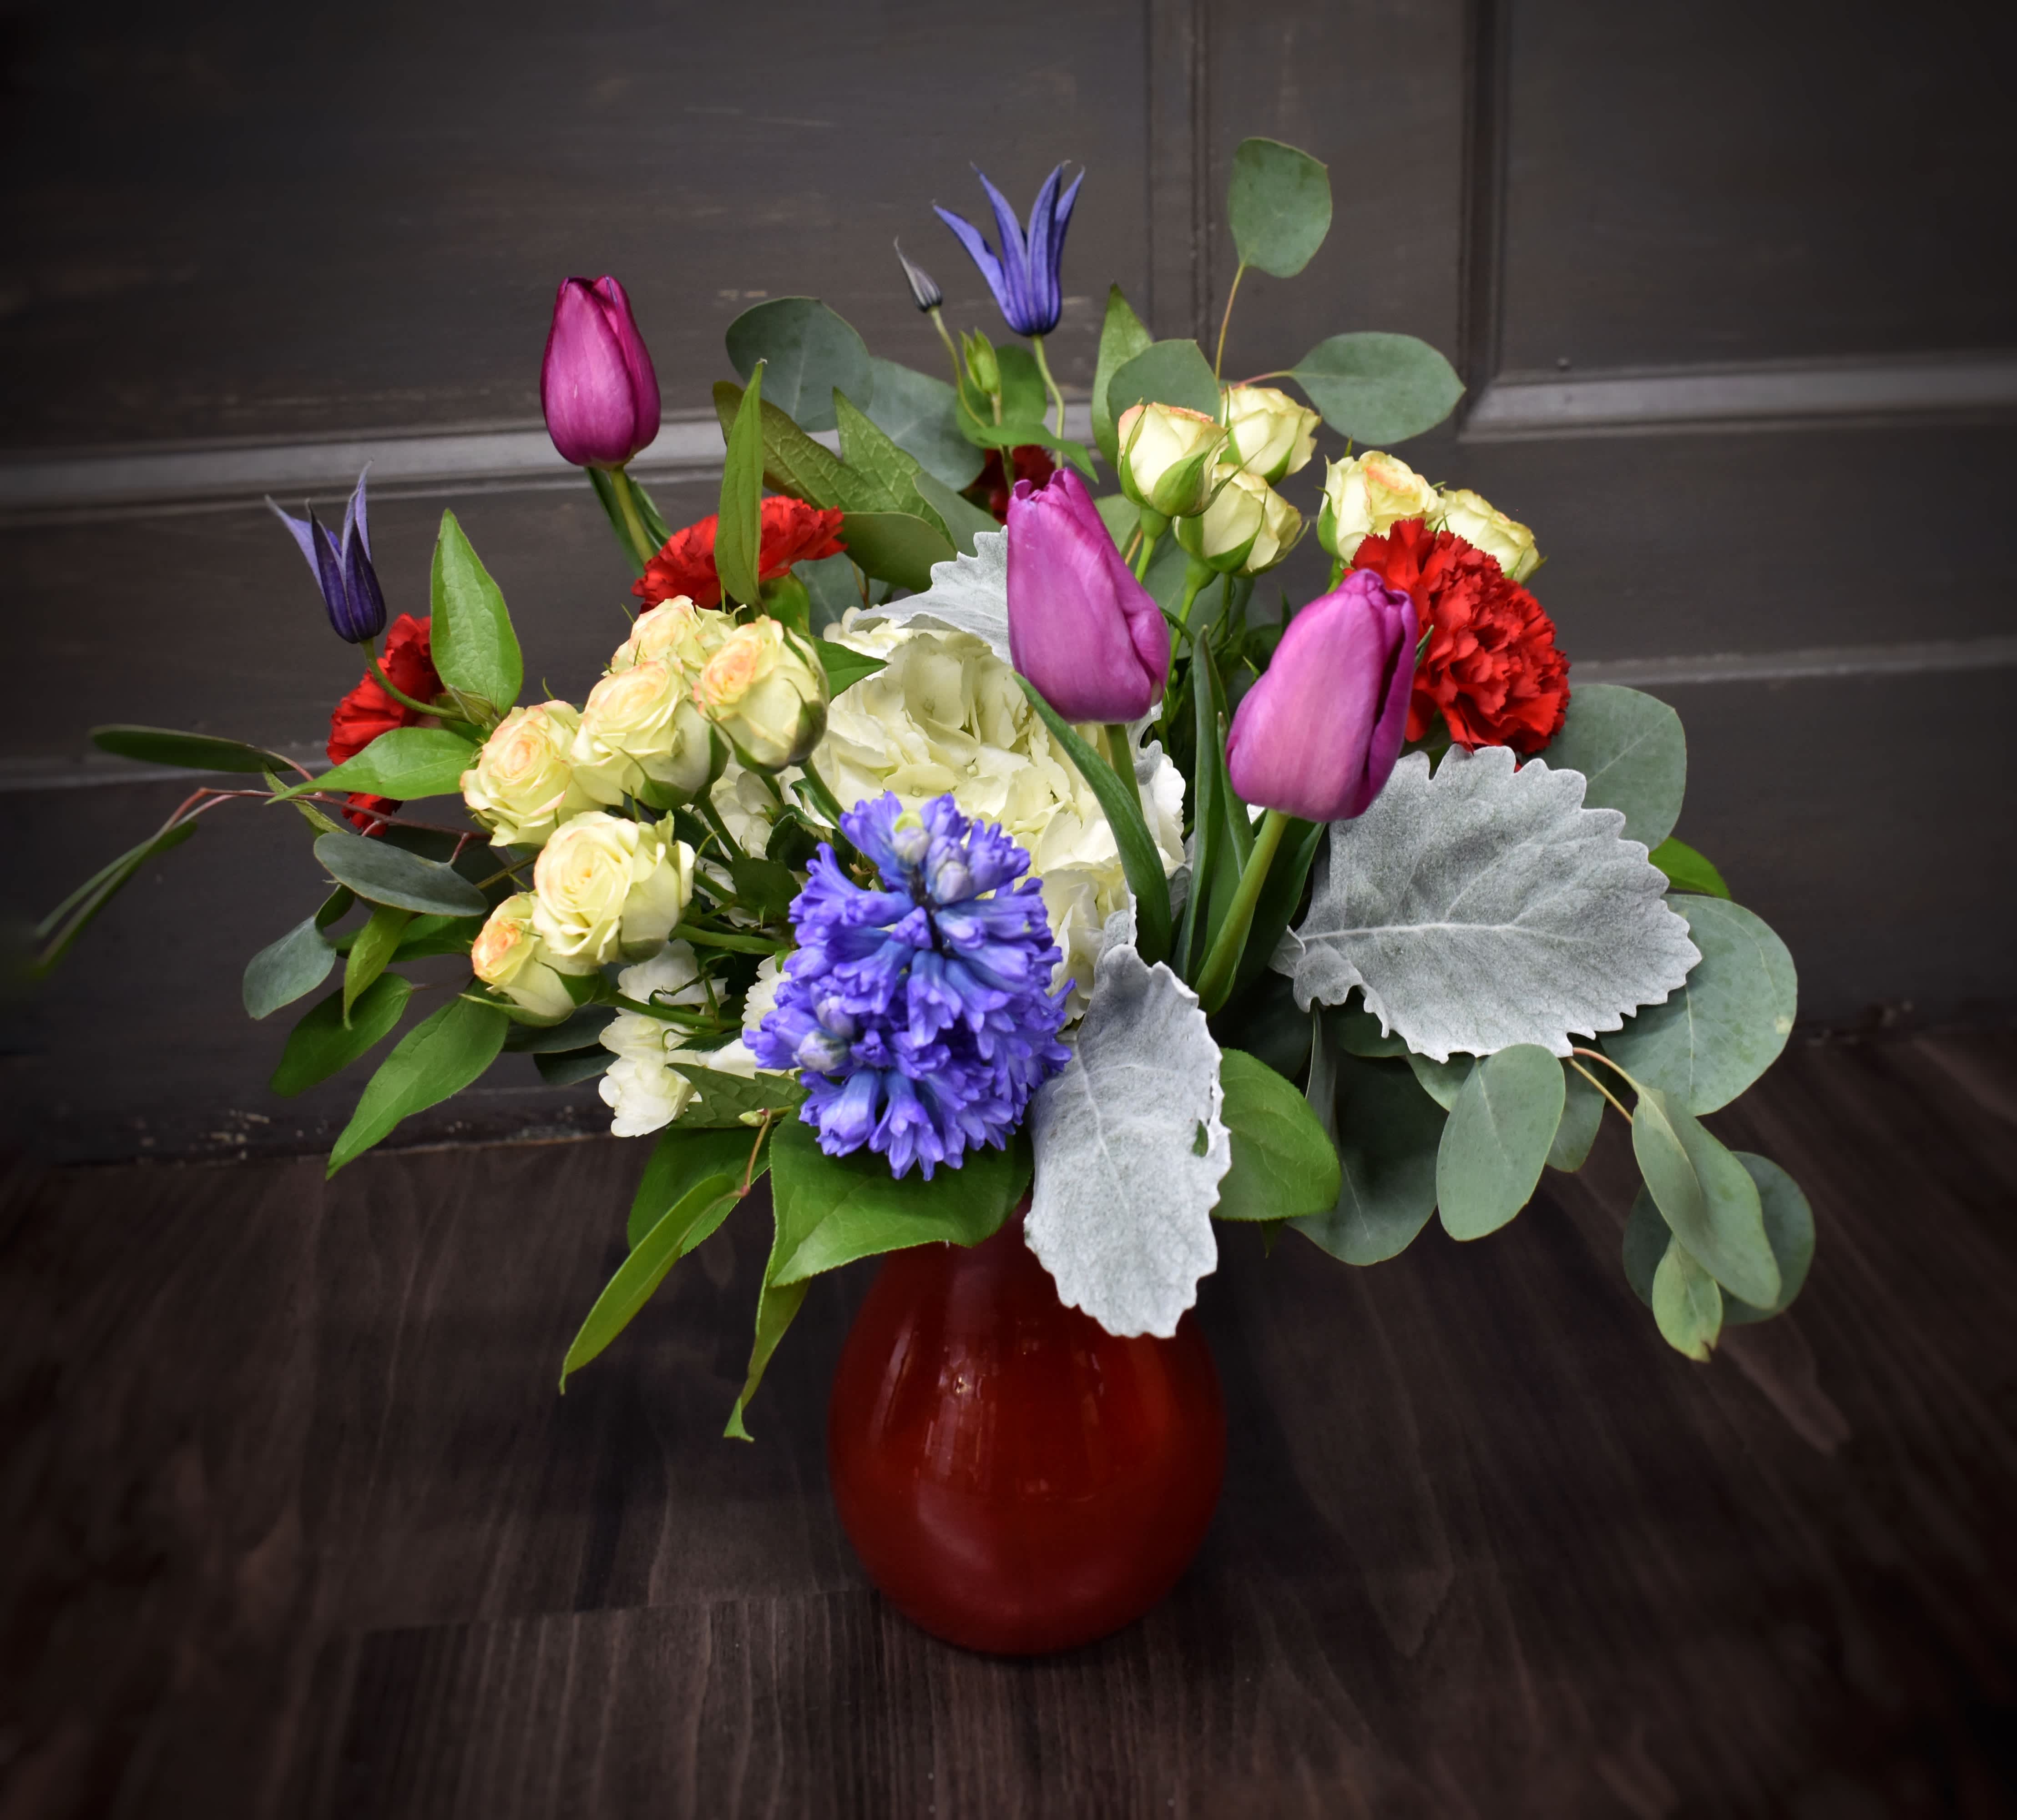 Cross My Heart - We love this colorful valentine bouquet! A bright red vase is filled with tulips, fragrant hyacinth, spring clematis, hydrangea, spray roses and carnations.